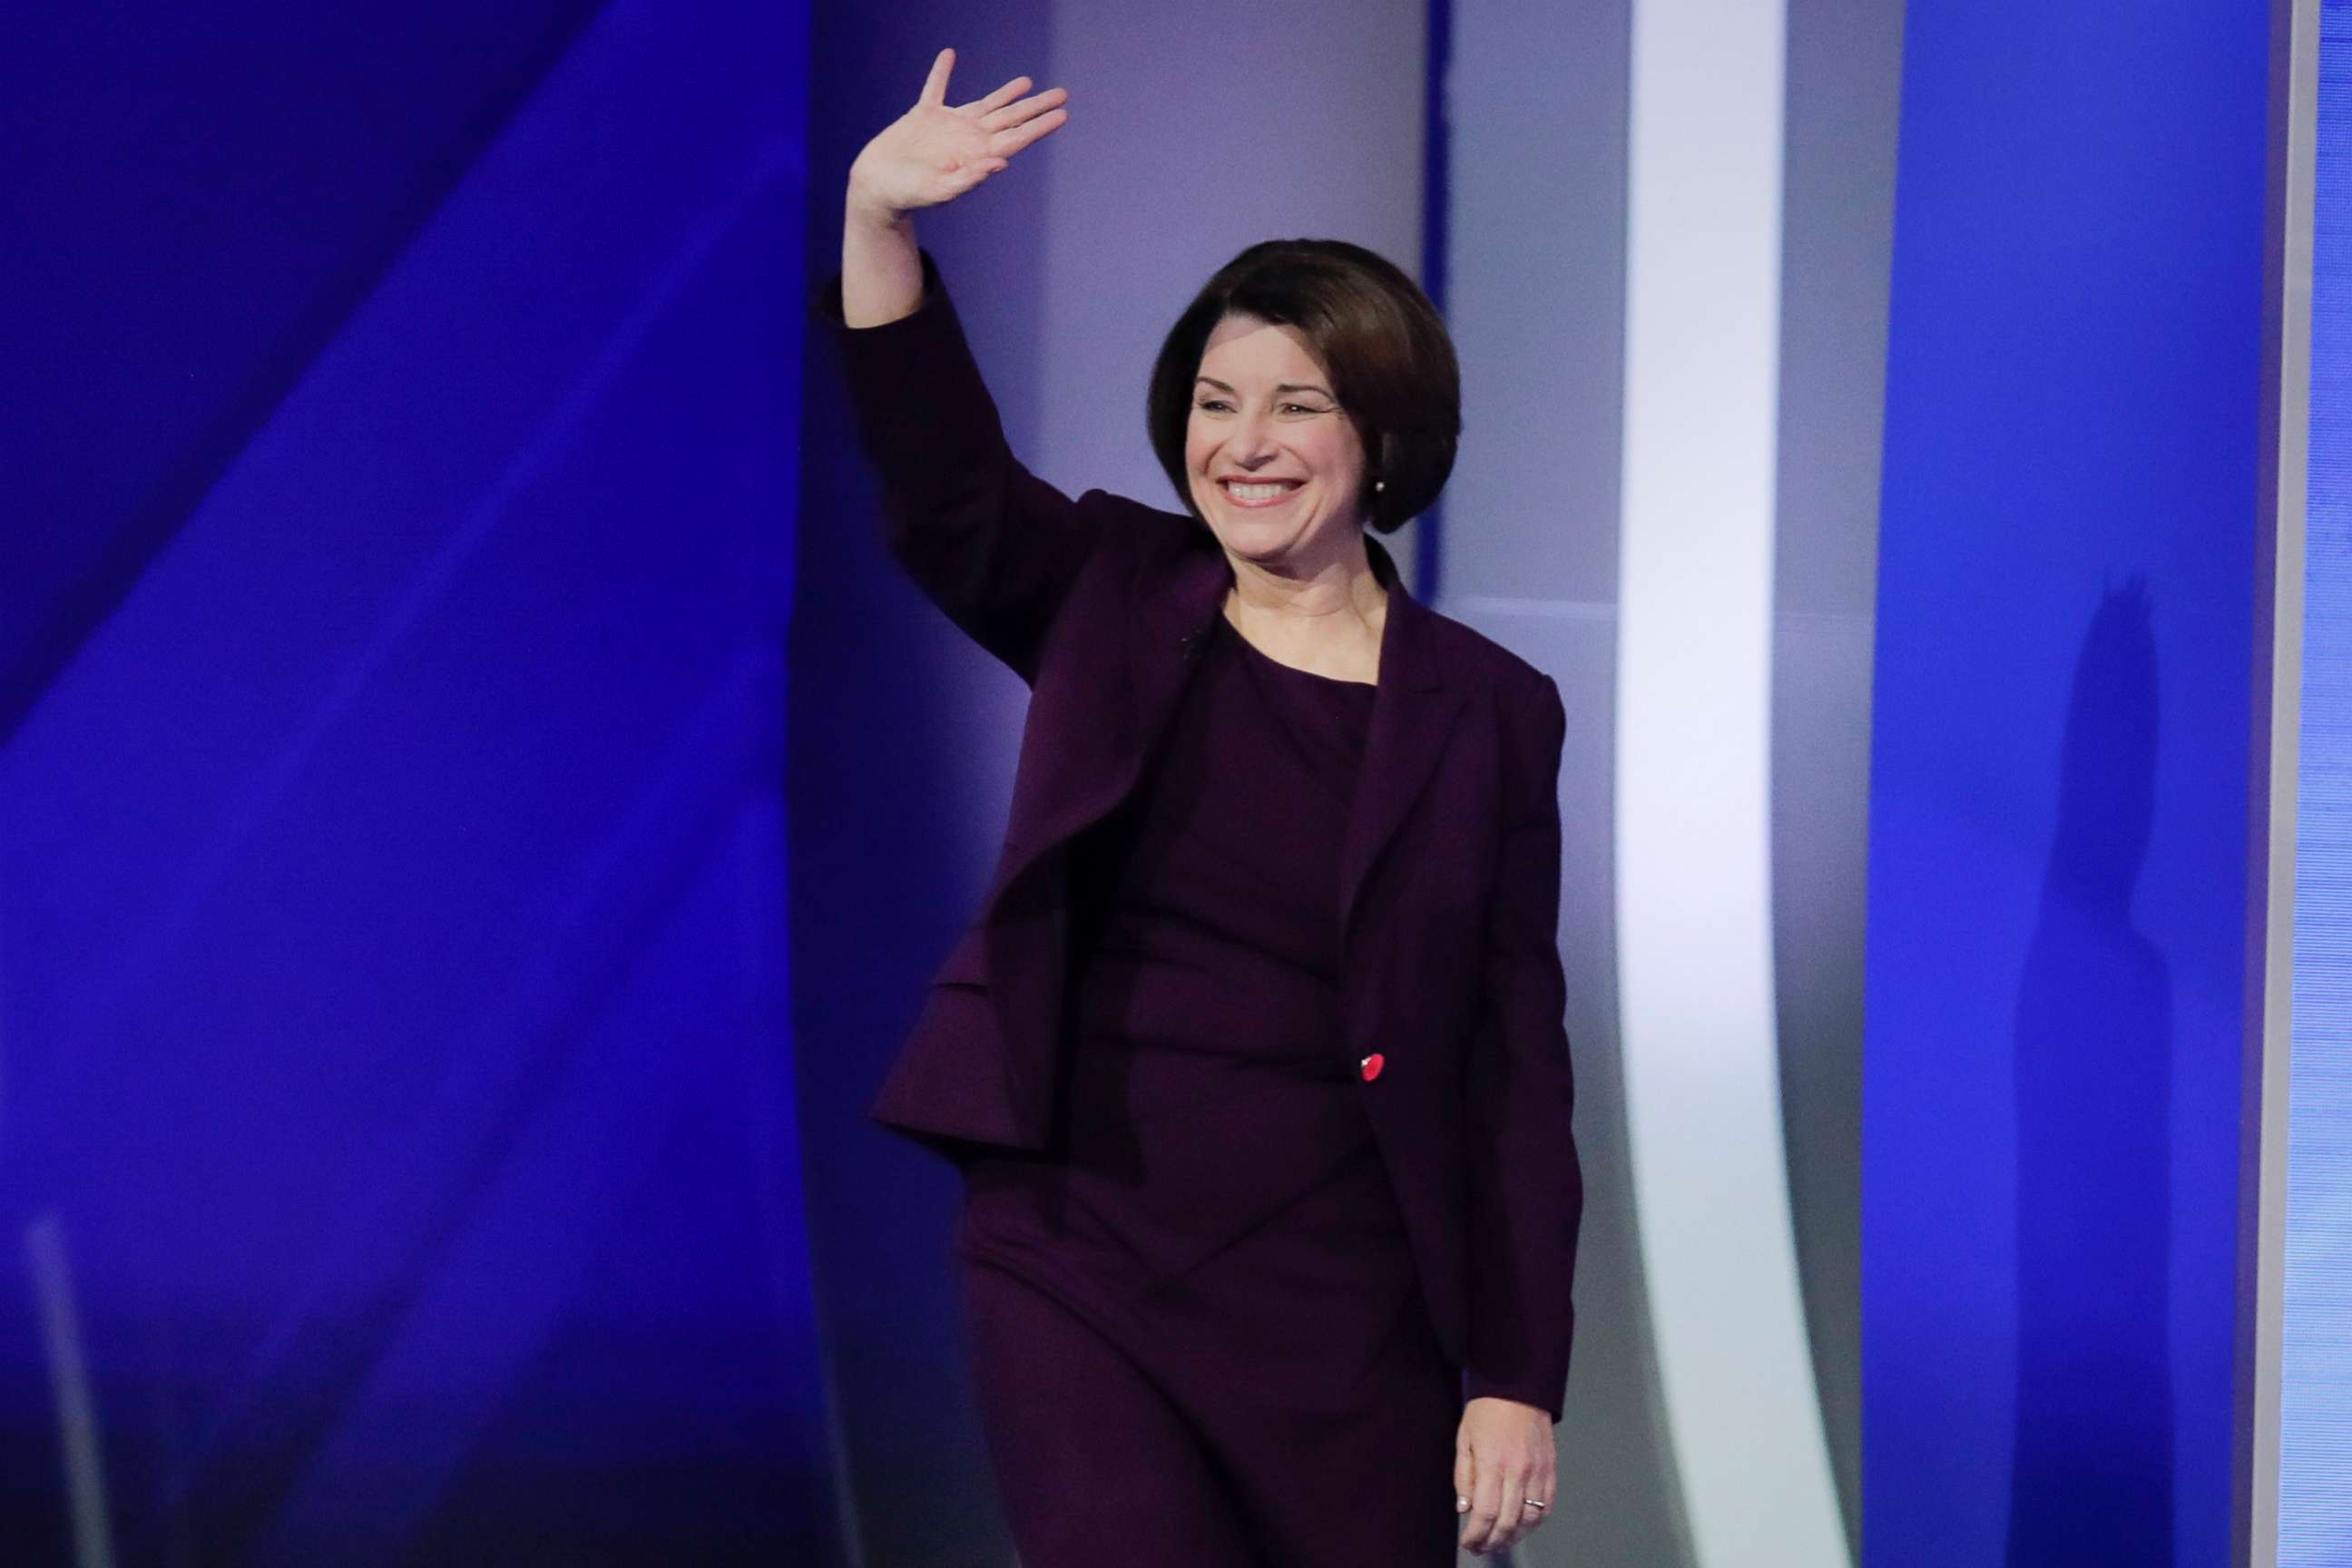 PHOTO: Sen. Amy Klobuchar waves as she walks on stage, Feb. 7, 2020, for the start of a Democratic presidential primary debate at Saint Anselm College in Manchester, N.H.